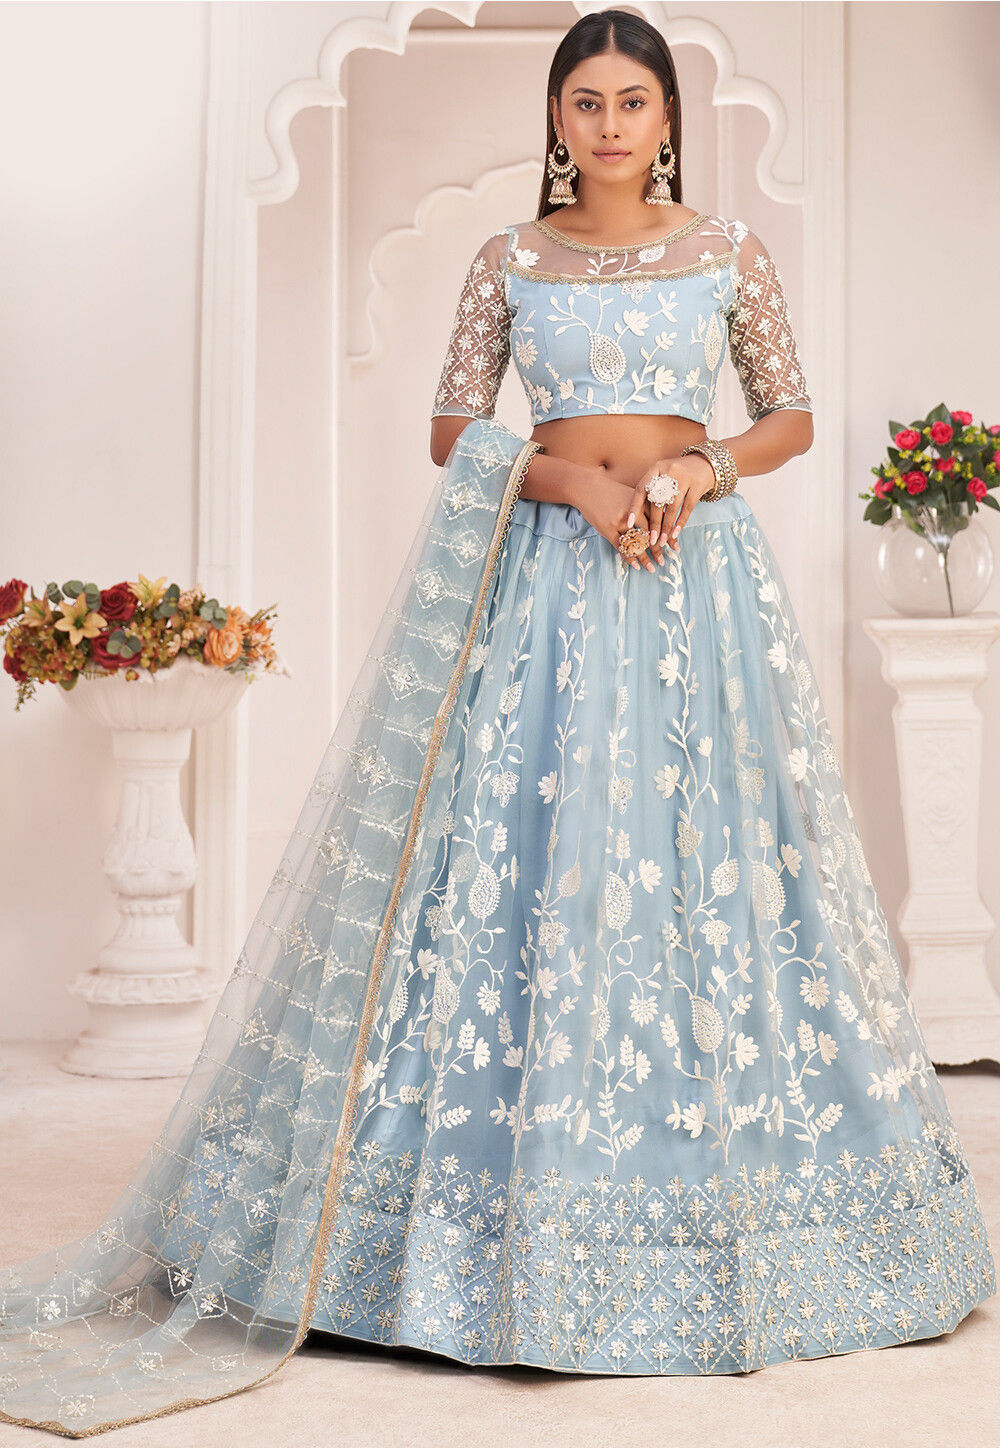 Tips And Tricks To Buy Wedding Lehenga Without Exceeding Your Budget